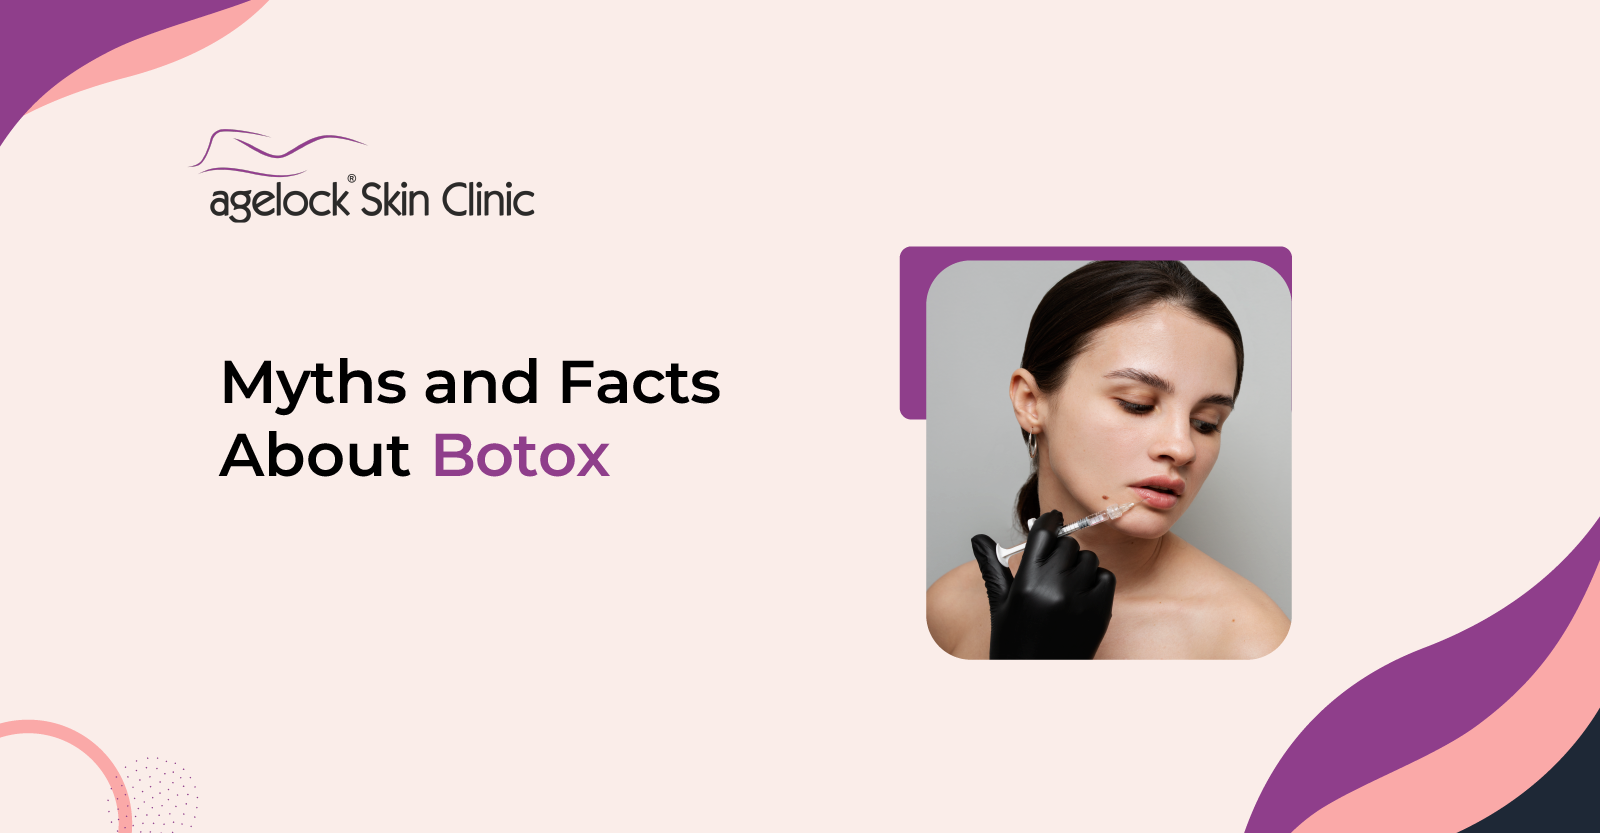 Myths and Facts About Botox